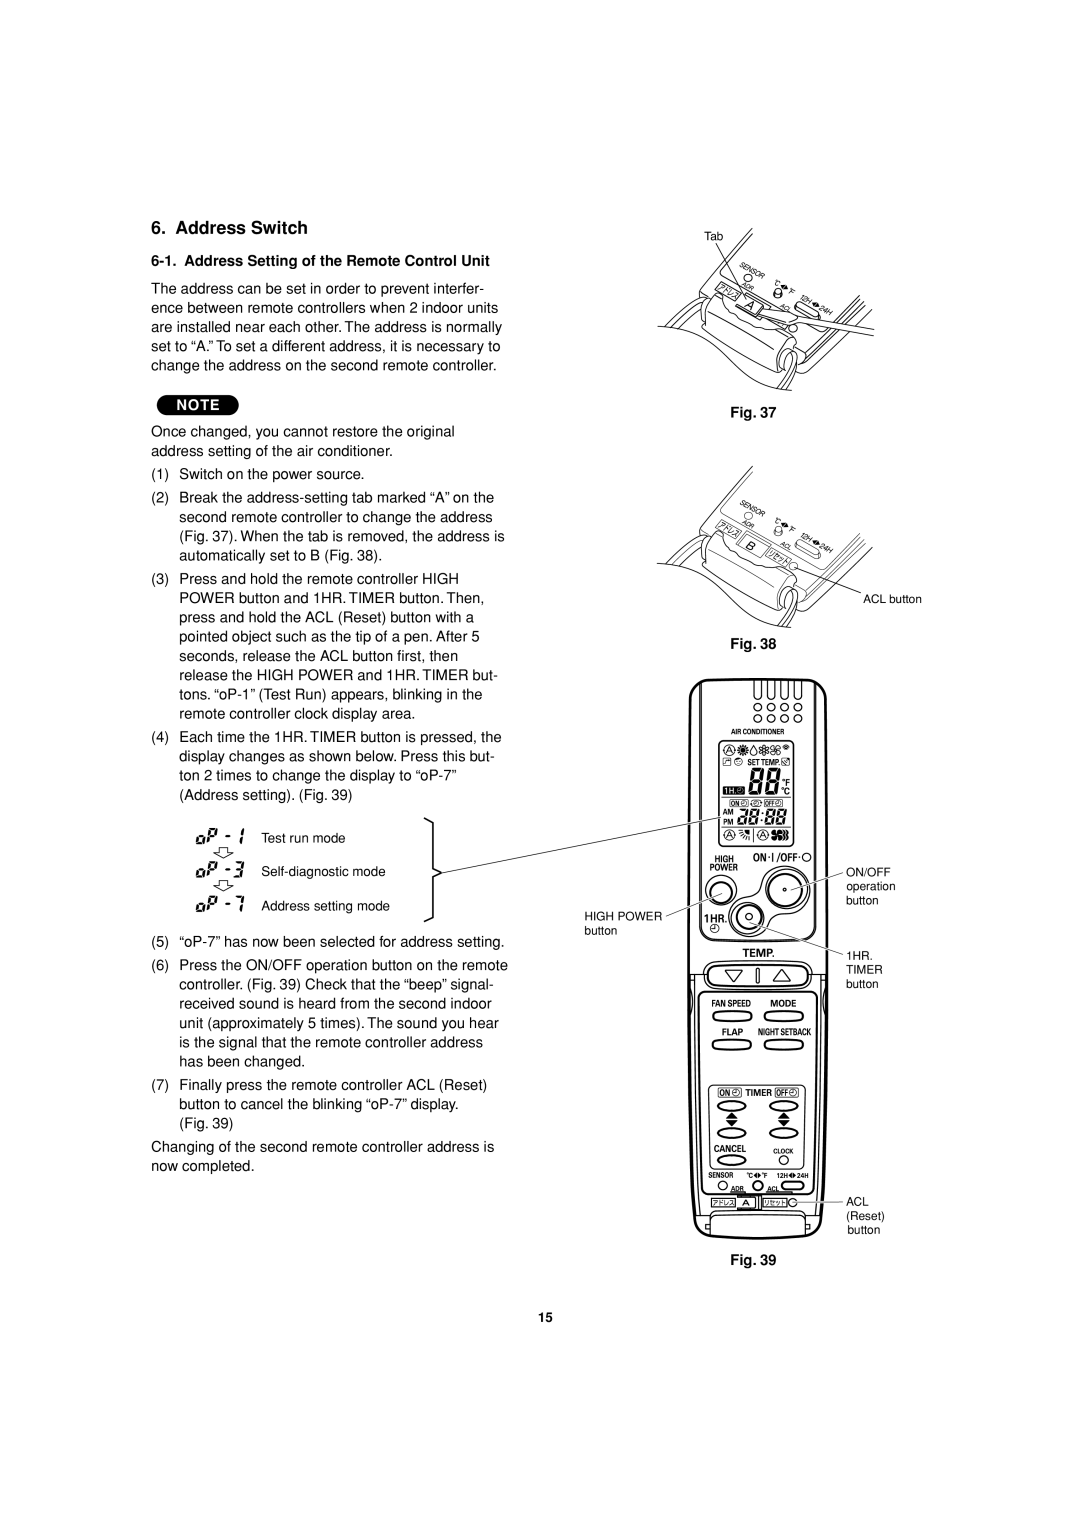 Sanyo XMHS0972, XMHS1272 service manual Address Switch, Address Setting of the Remote Control Unit, Fig 